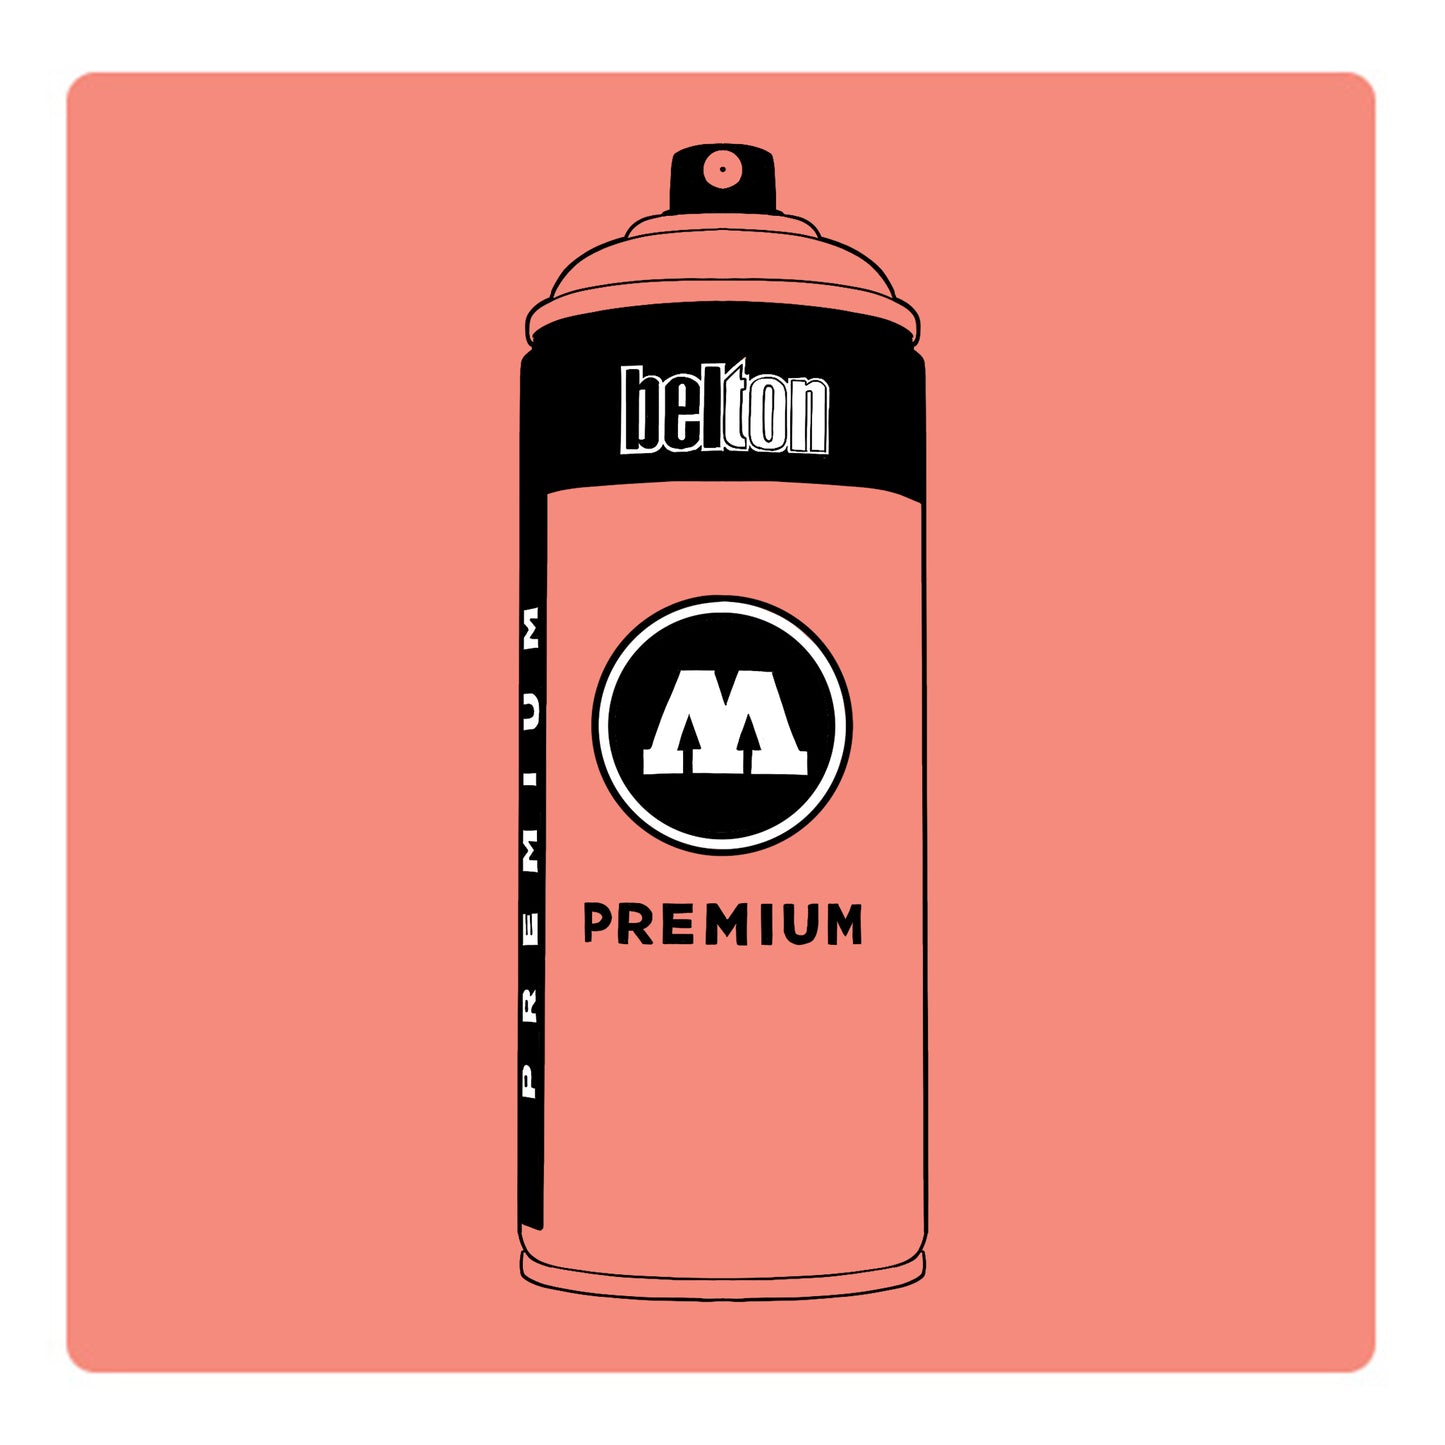 A black outline drawing of a pastel peach spray paint can with the words "belton","premium" and the letter"M" written on the face in black and white font. The background is a color swatch of the same pastel peach with a white border.